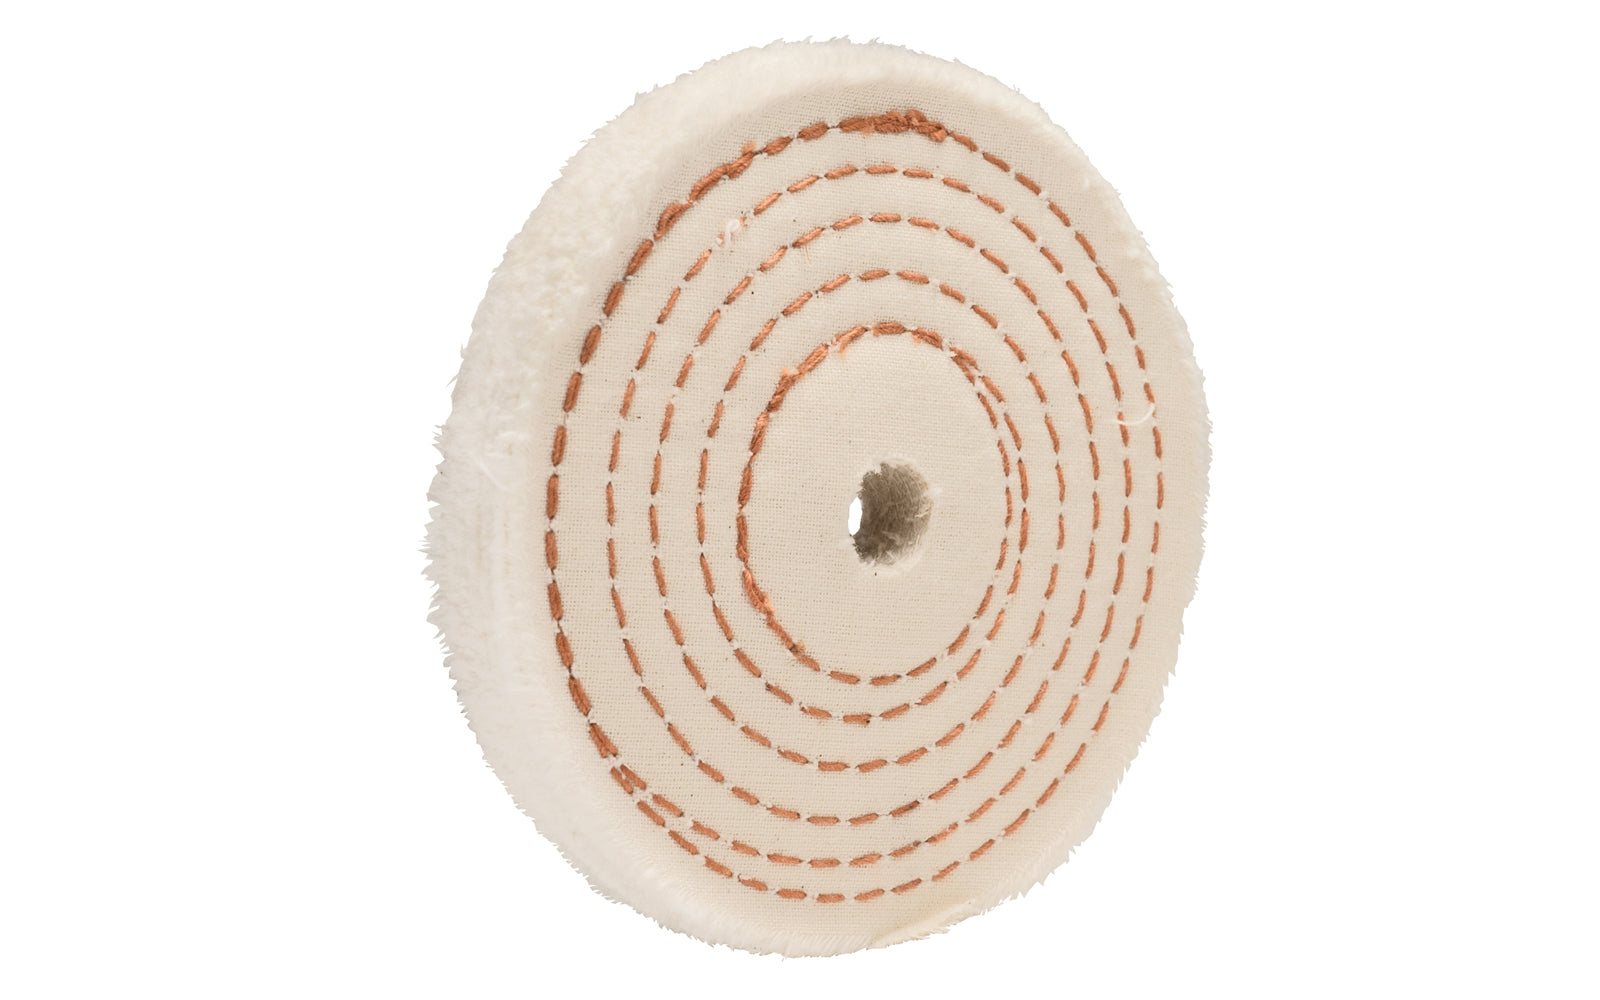 The 4" Spiral Sewn Buffing Wheel ~ 1/2" Thick for aggressive cutting & coarse buffing. 1/2" hole diameter. 1/2" wide thickness. Made in USA. This spiral sewn wheel is designed for prolong service. Good for coarse cutting & buffing, & flexible grinding. Stiffer cotton sheeting - Held together lockstitch sewing ~ Dico Polishing Company 528-40-4